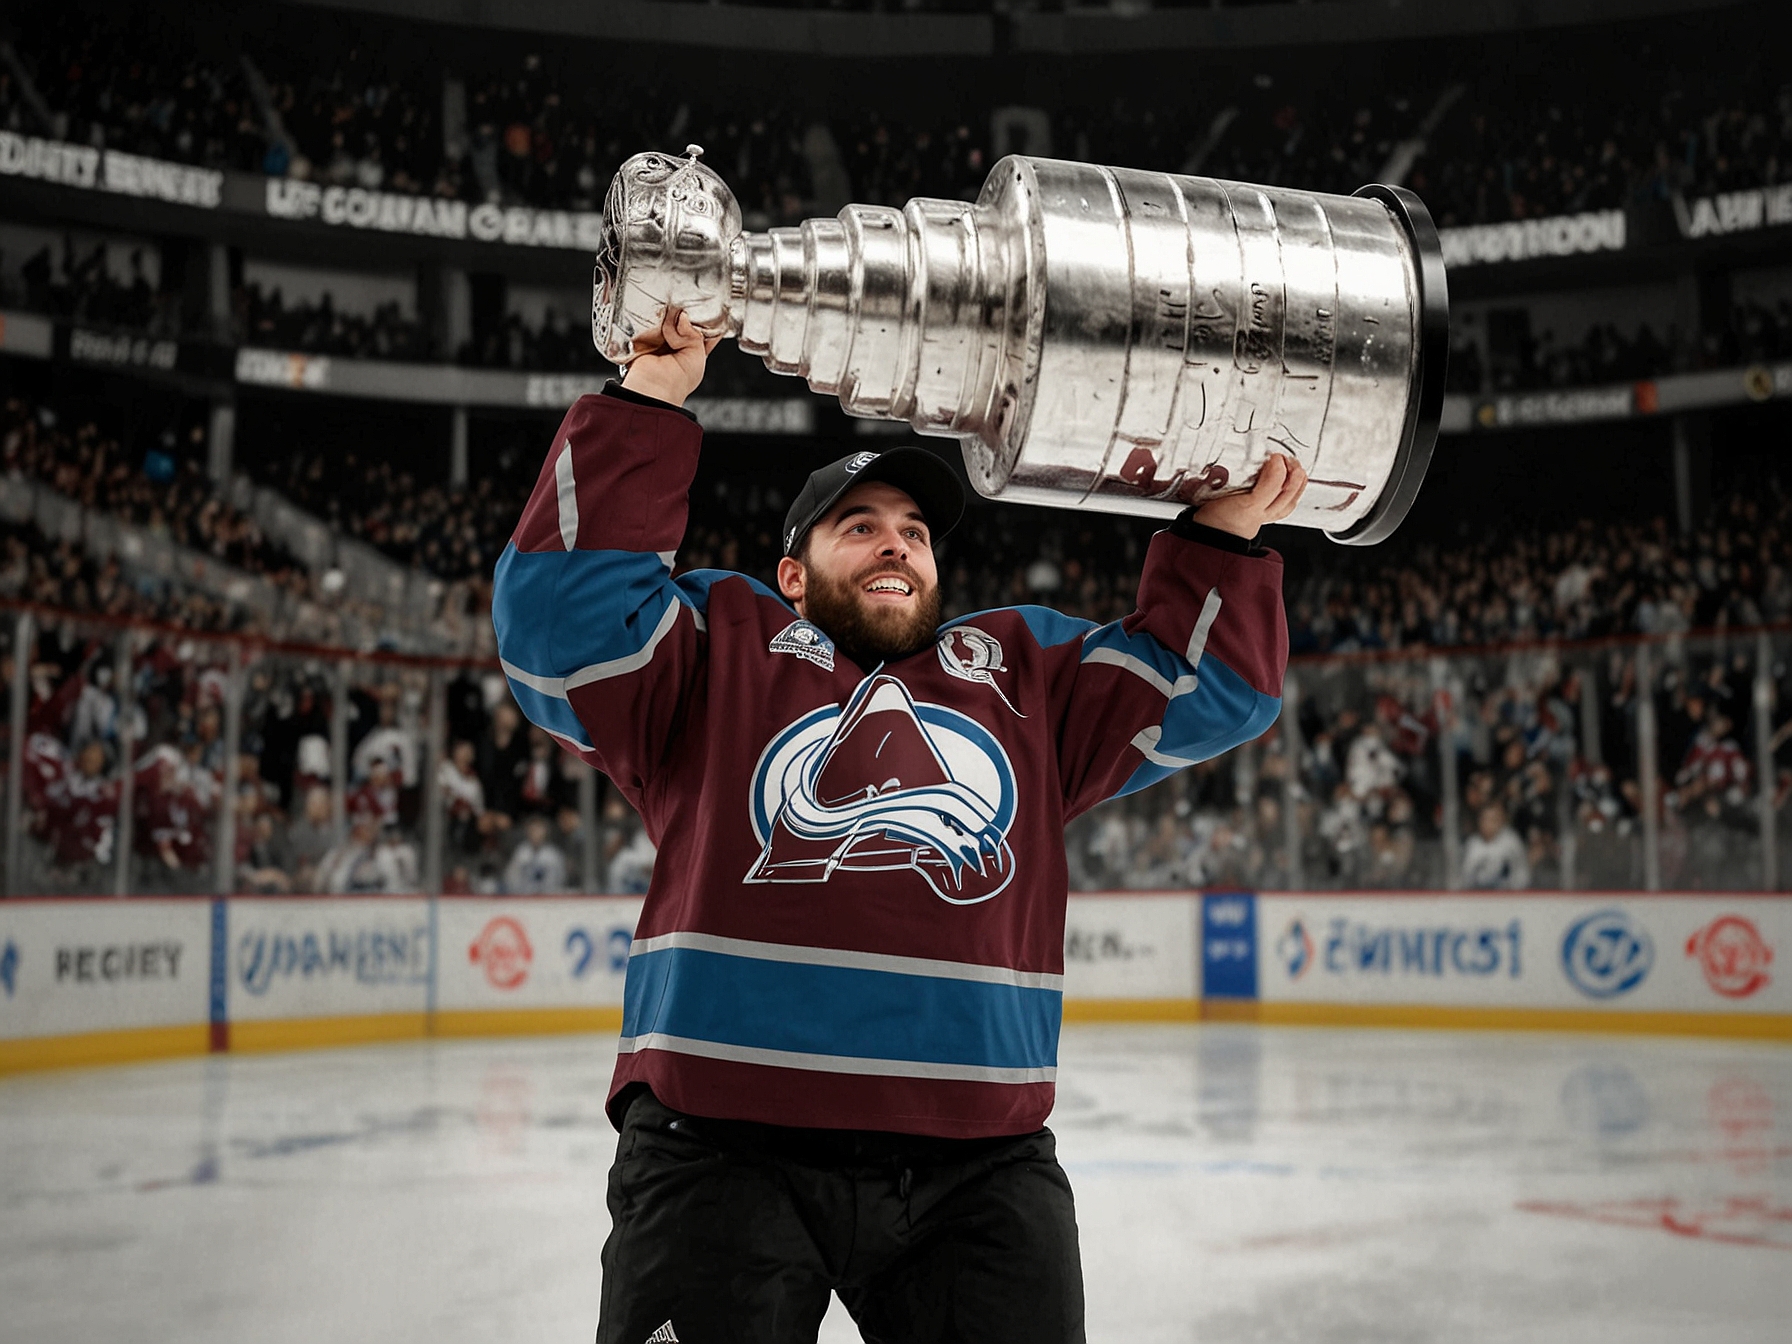 Cogliano lifting the Stanley Cup with the Colorado Avalanche in 2022, celebrating his significant career achievement and highlighting his role as a veteran presence and mentor for the team.